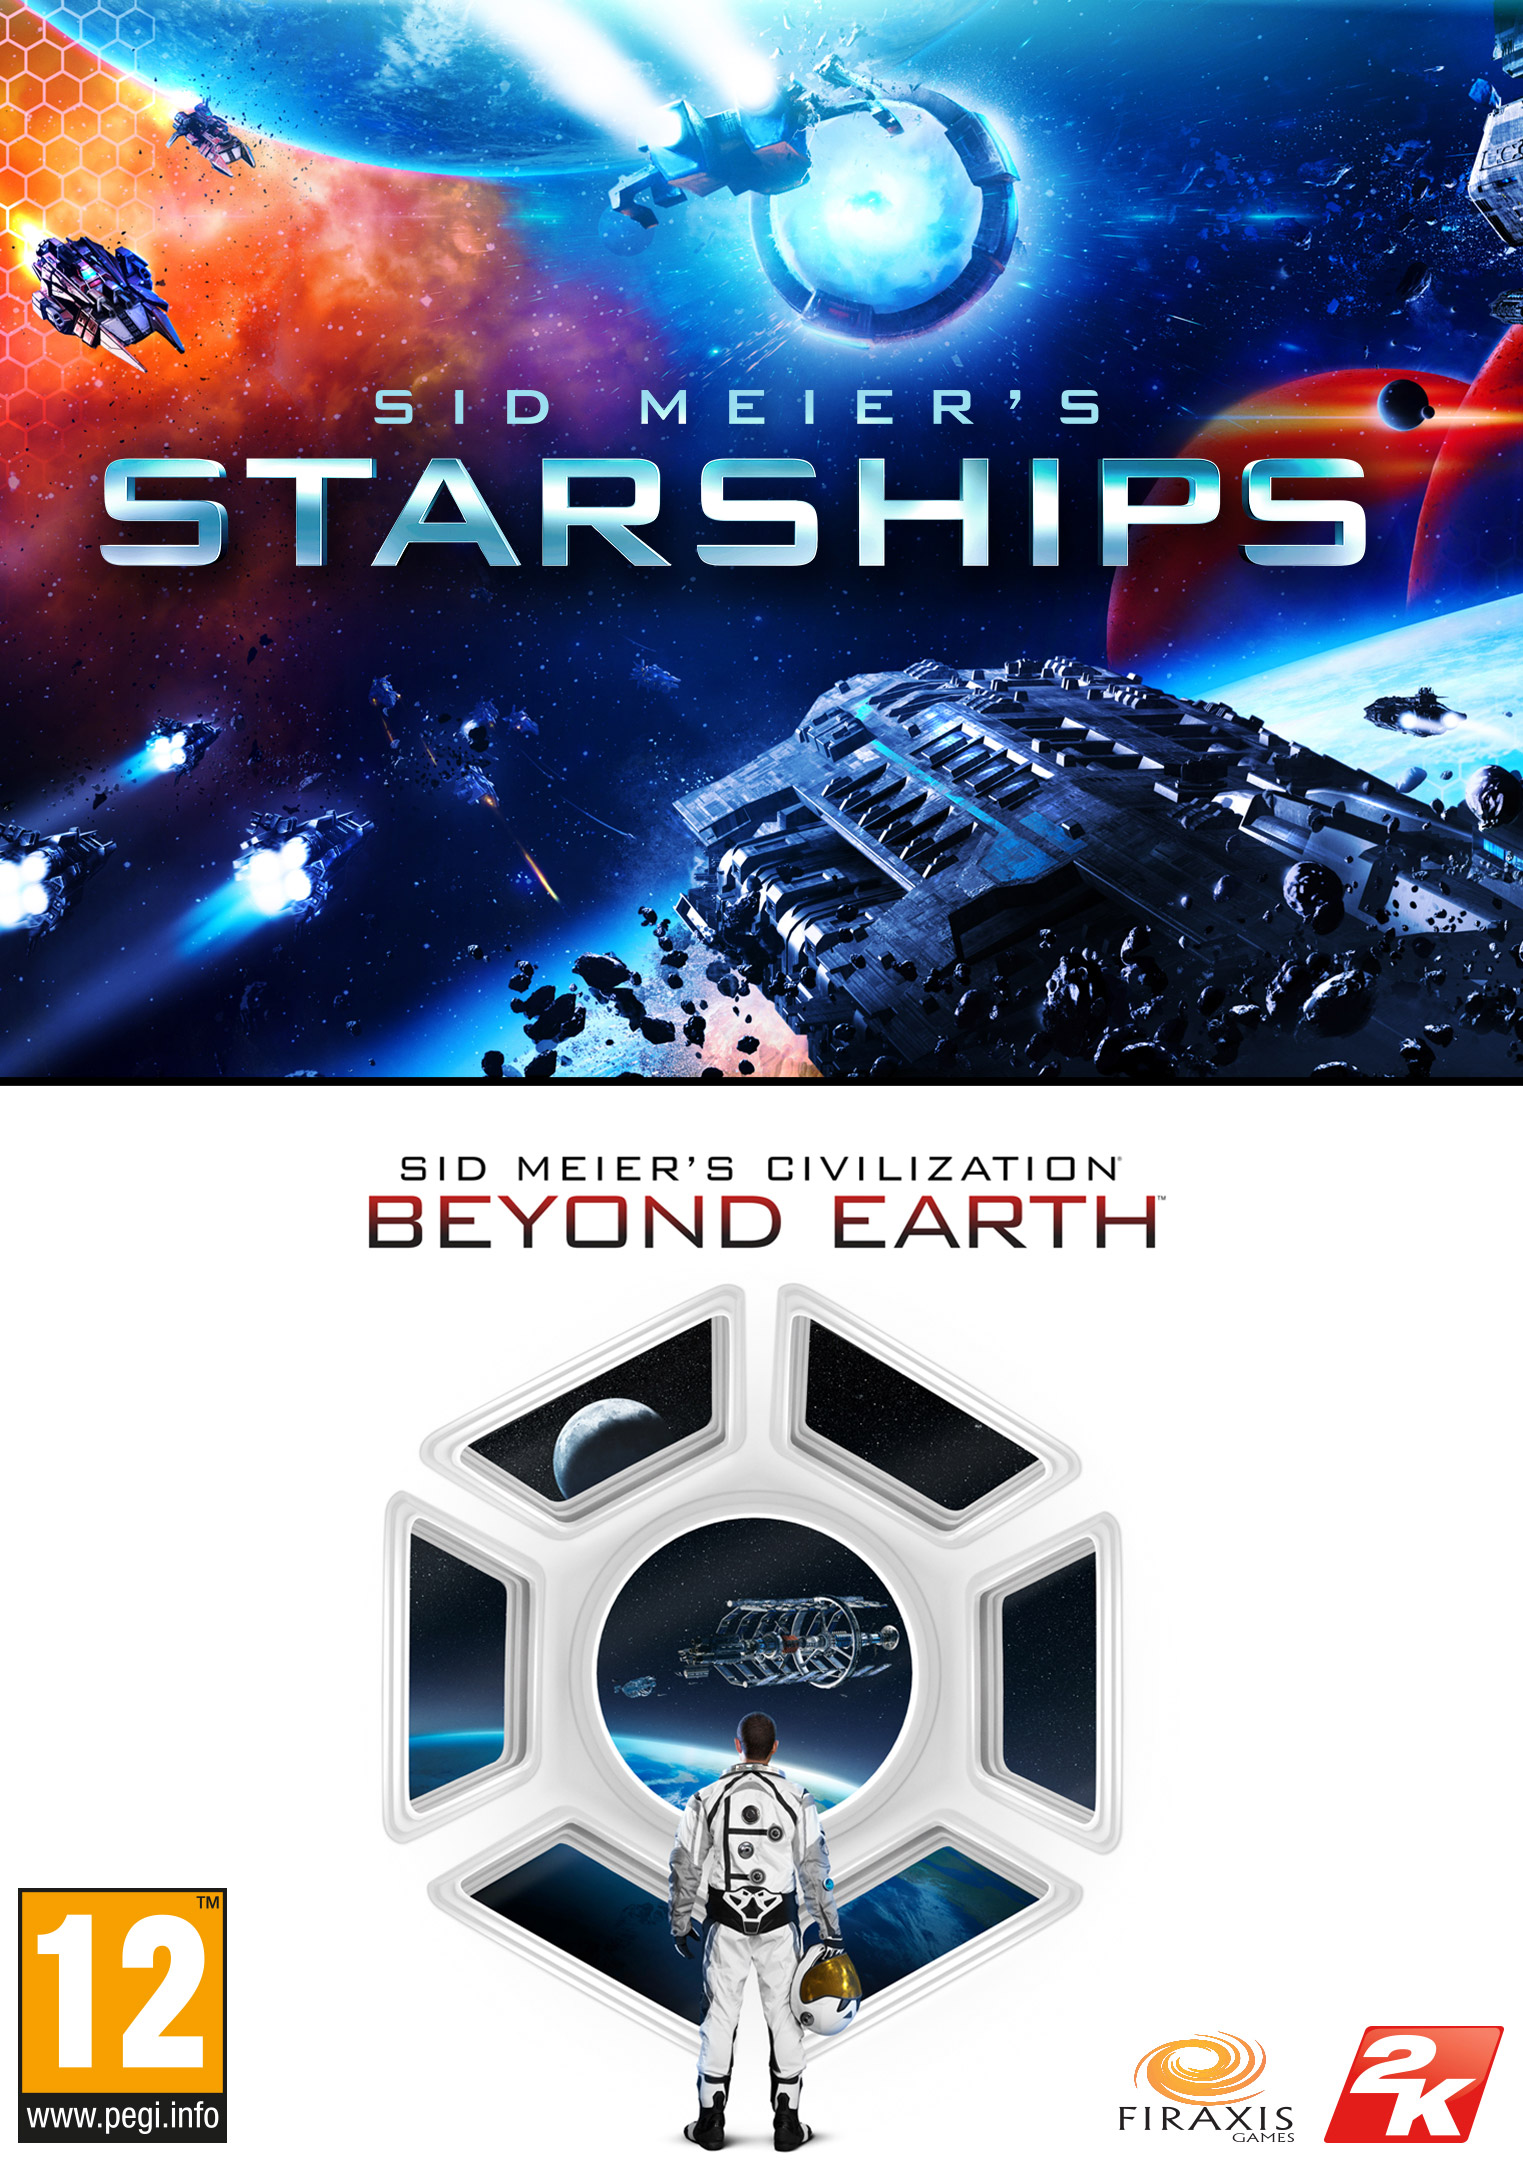 Sid Meier’s Starships and Civilization: Beyond Earth